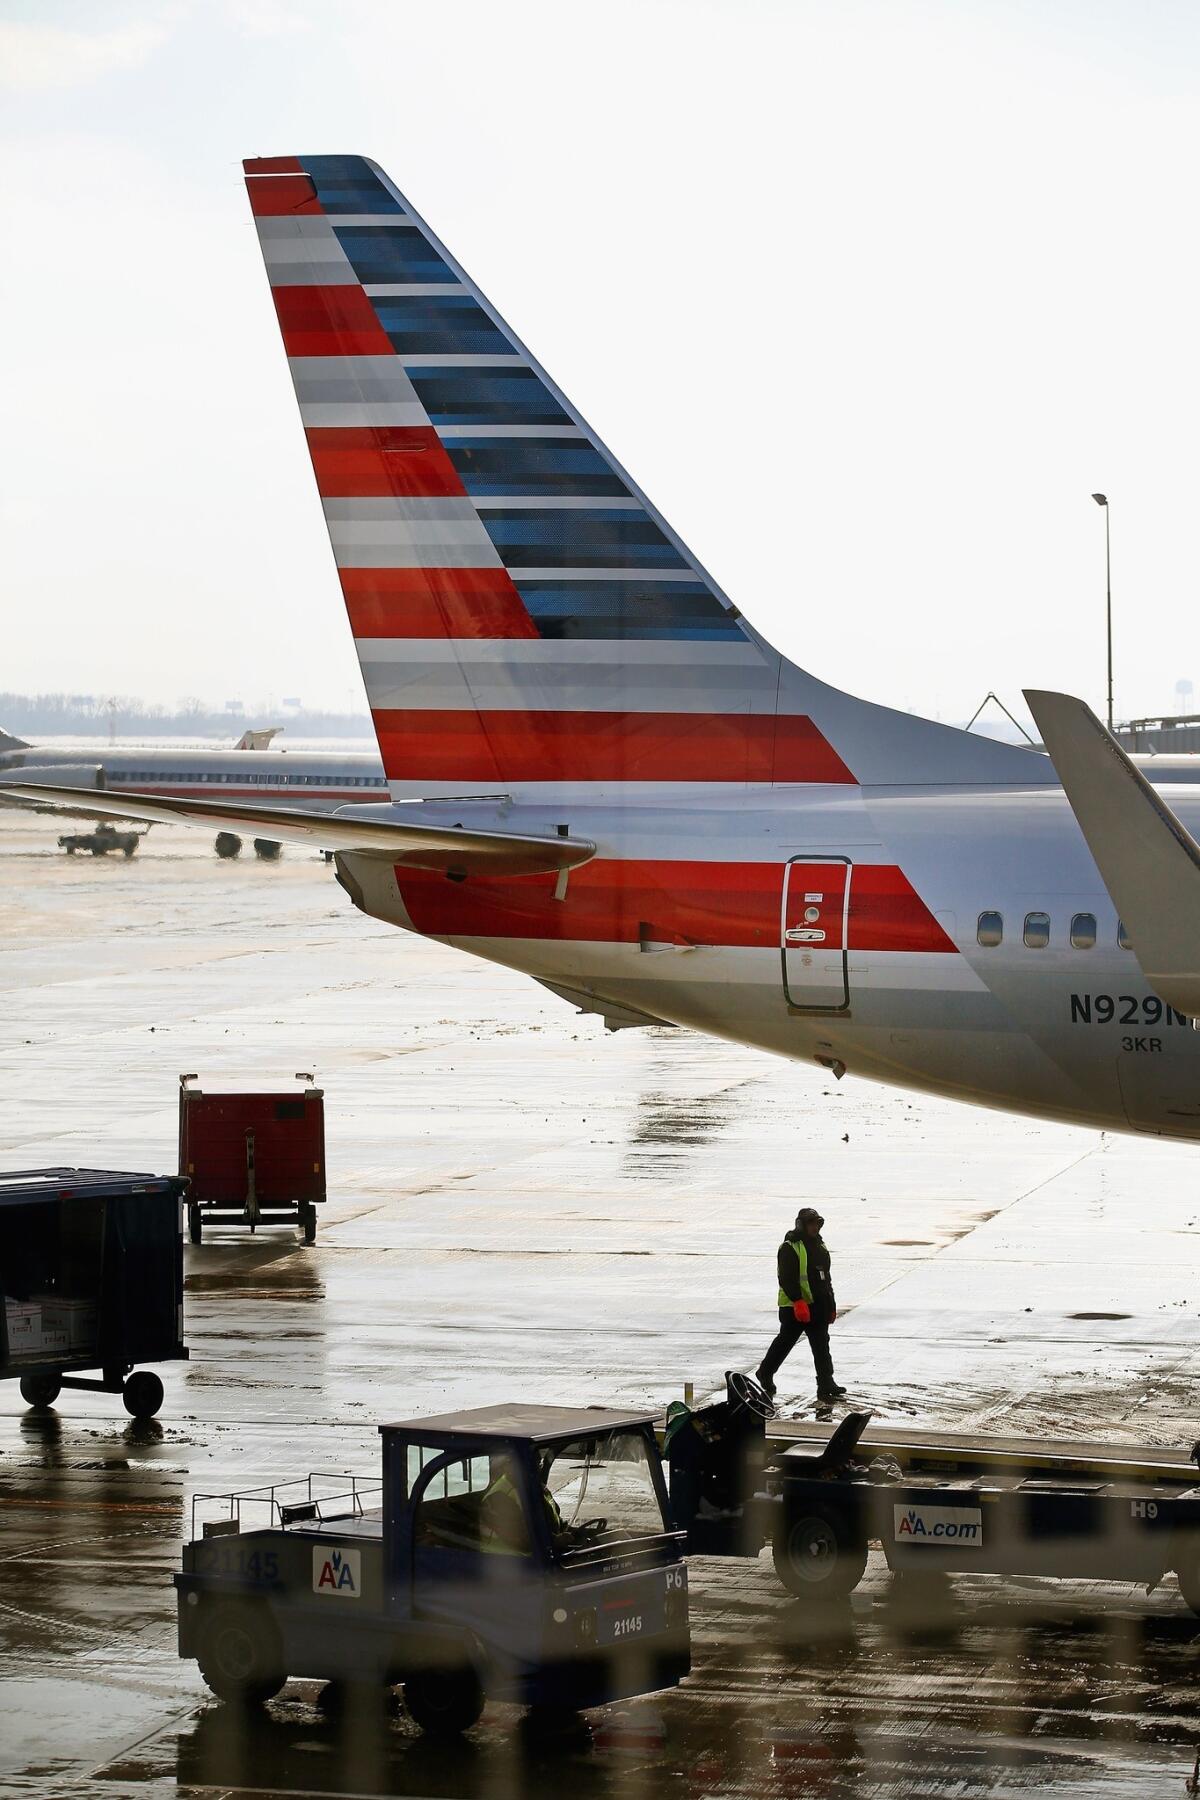 Why American Airlines Changed Its Logo